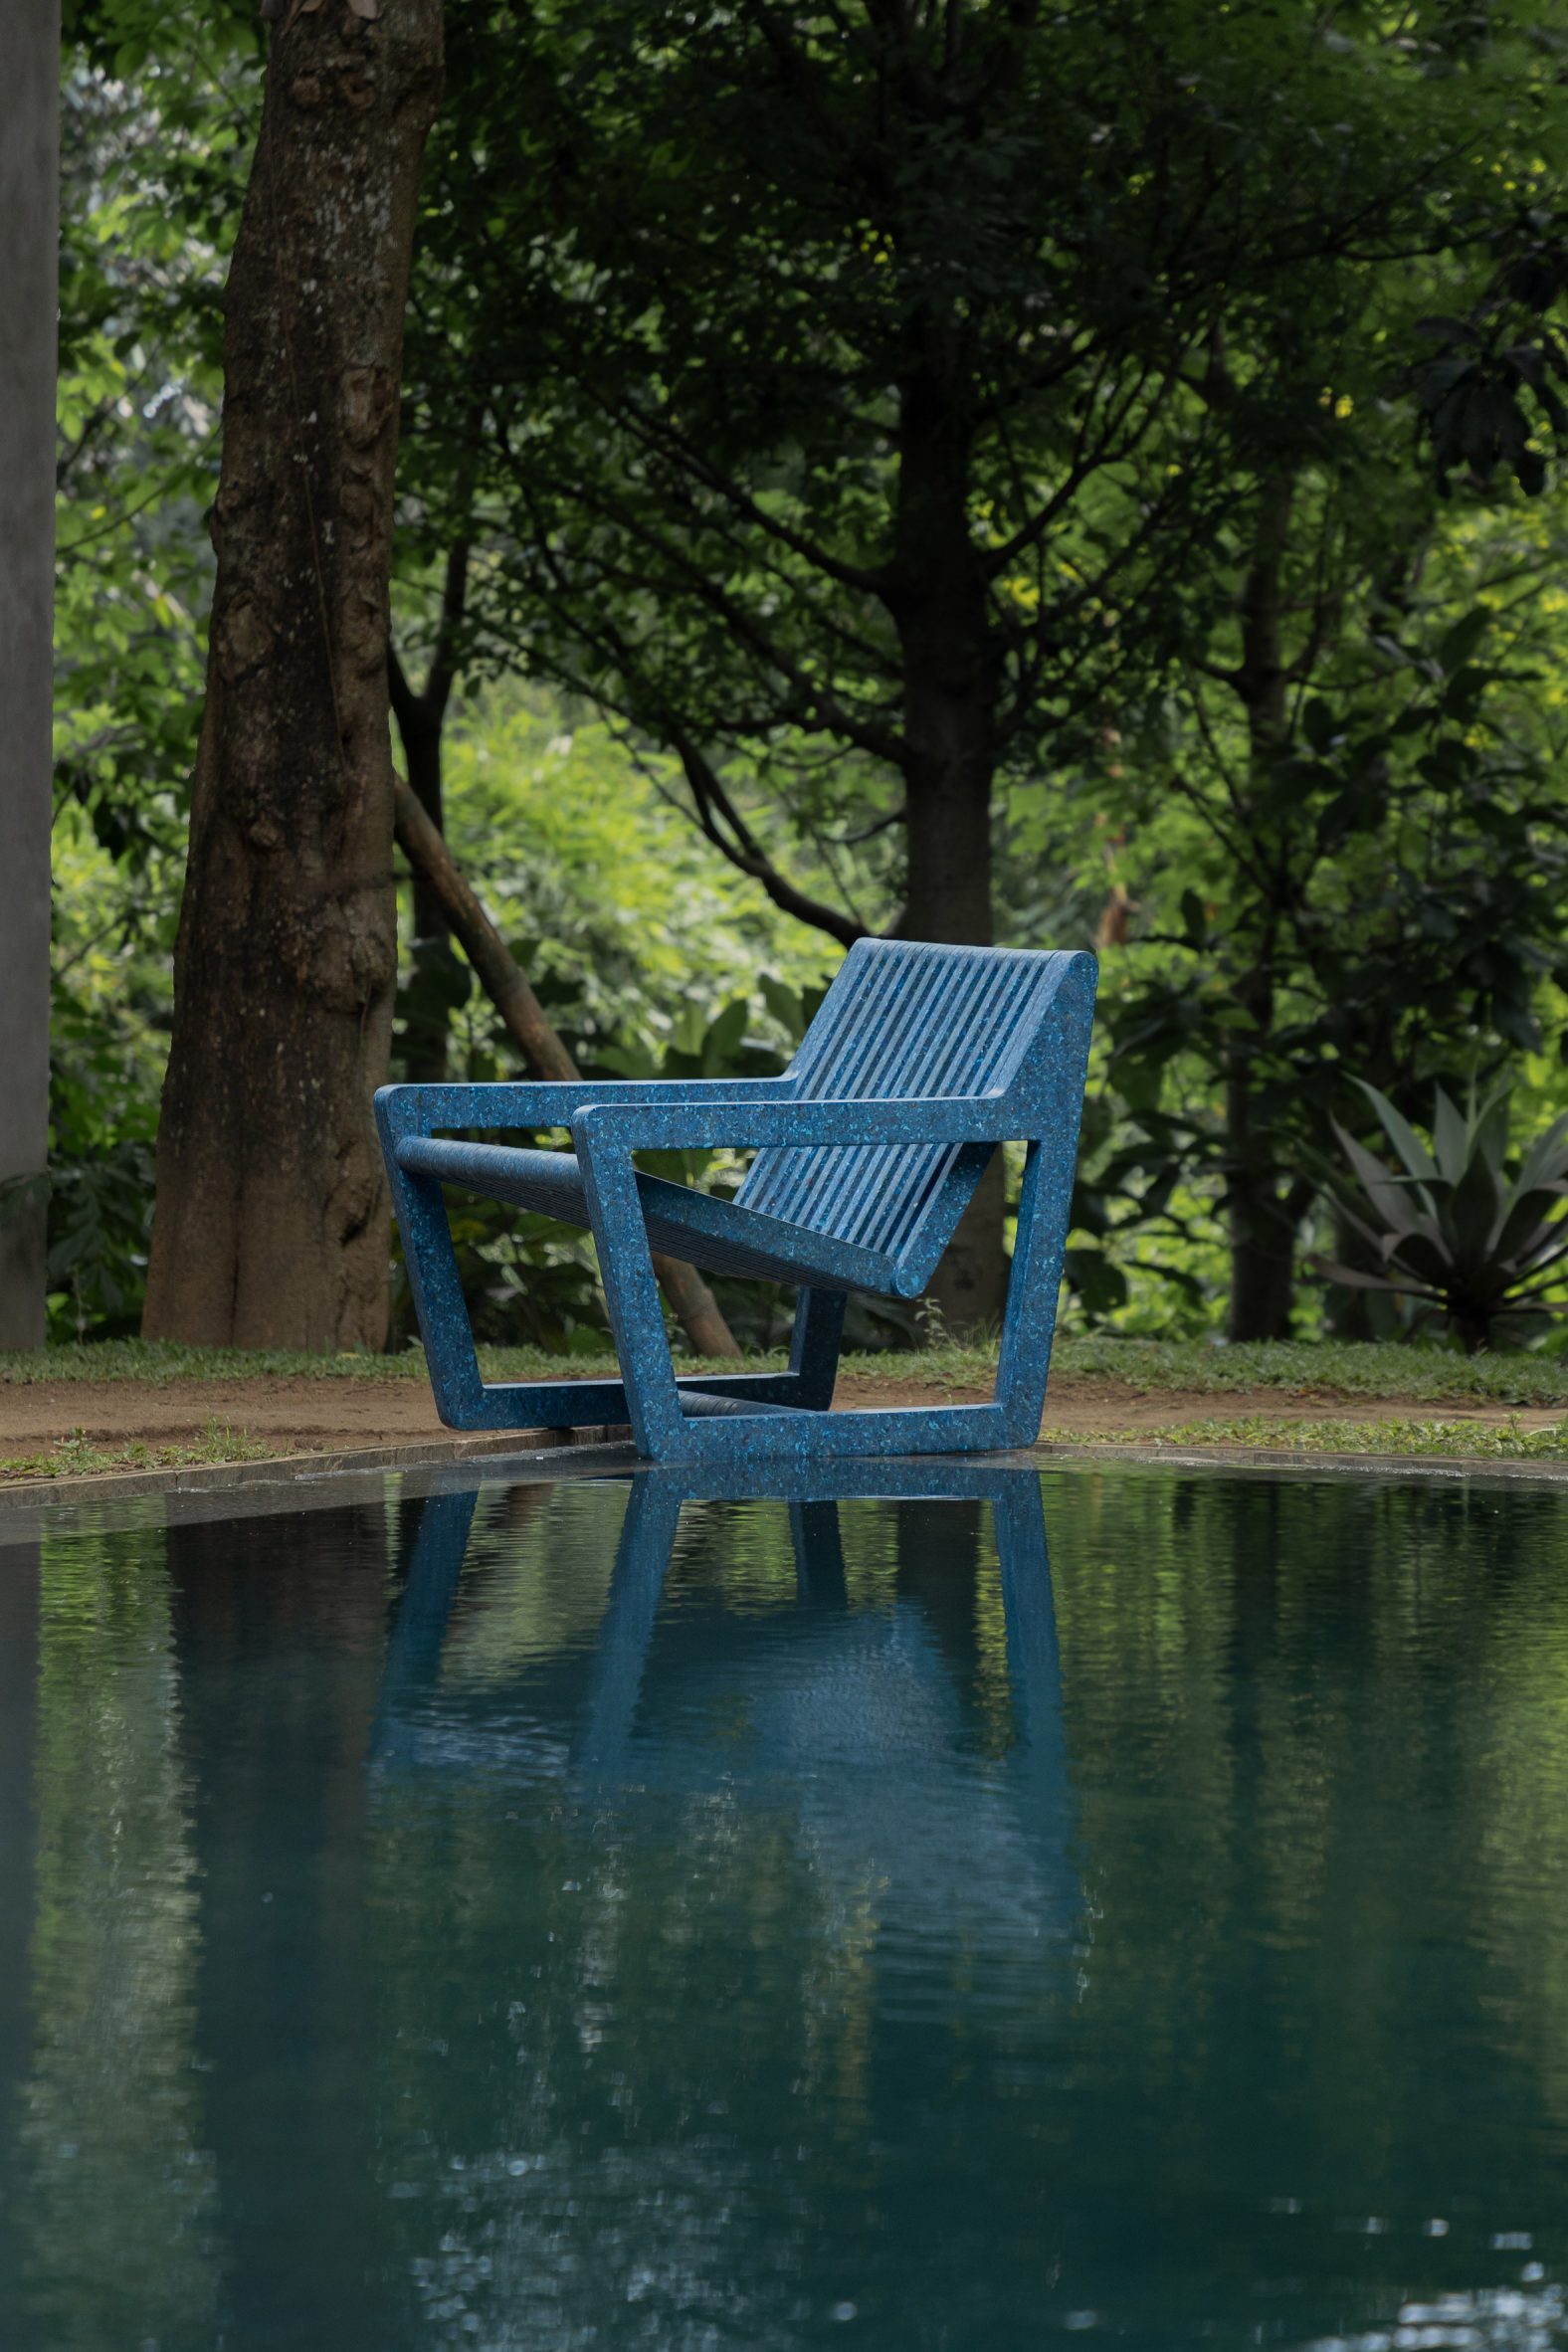 Blue Ombak chair next to a pool